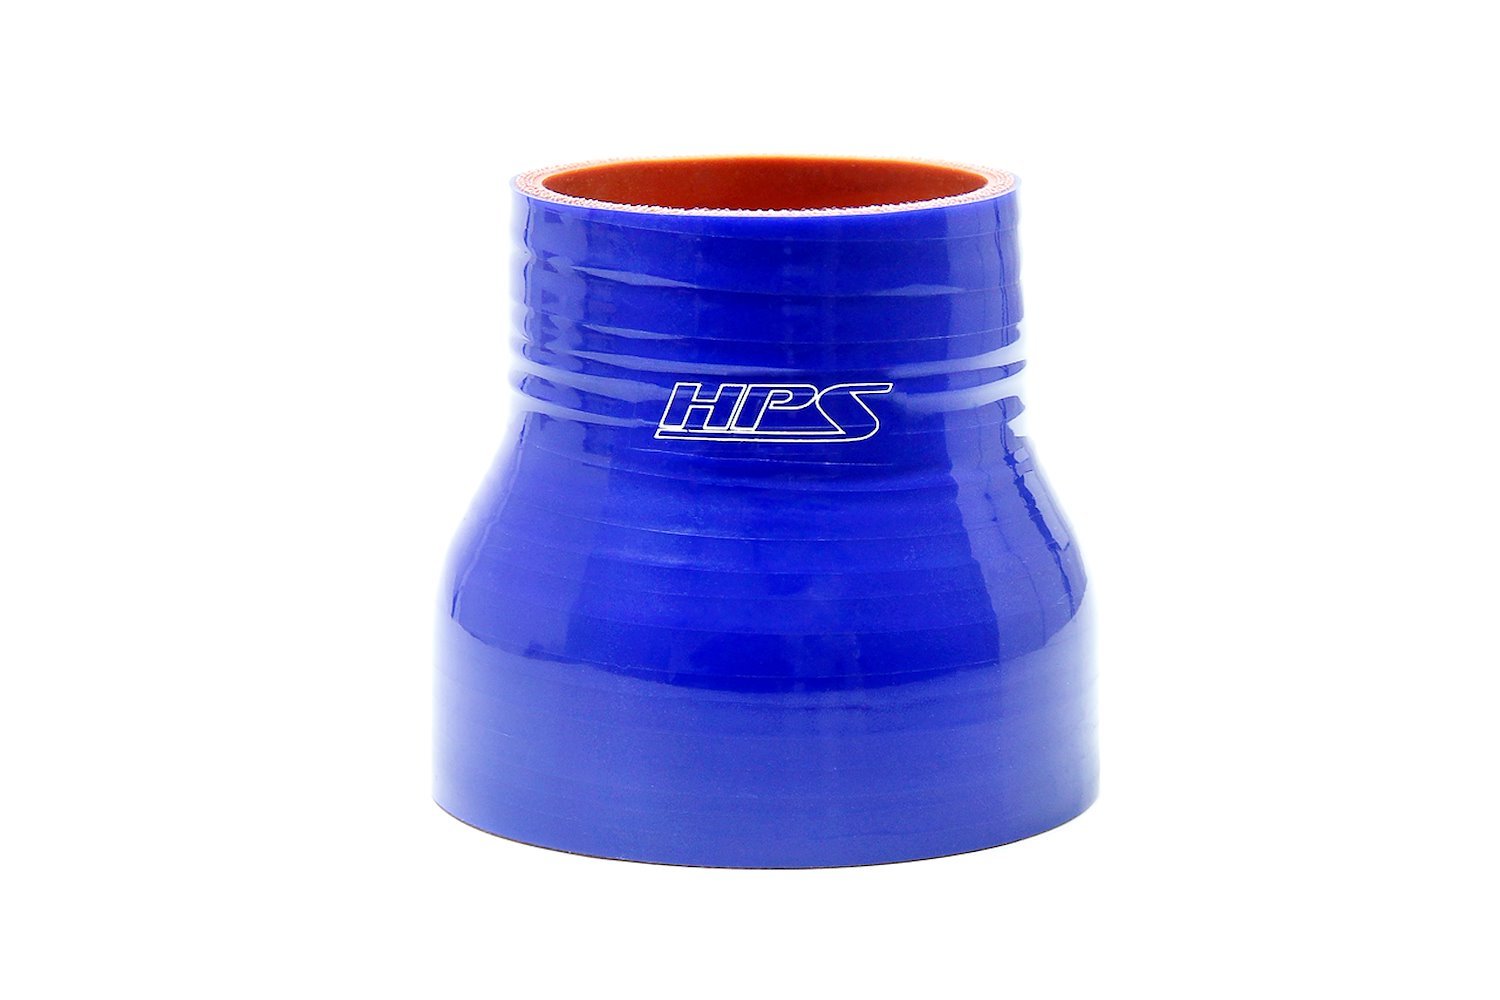 HTSR-275-400-L4-BLUE Silicone Reducer Hose, High-Temp 4-Ply Reinforced, 2-3/4 in. - 4 in. ID, 4 in. Long, Blue